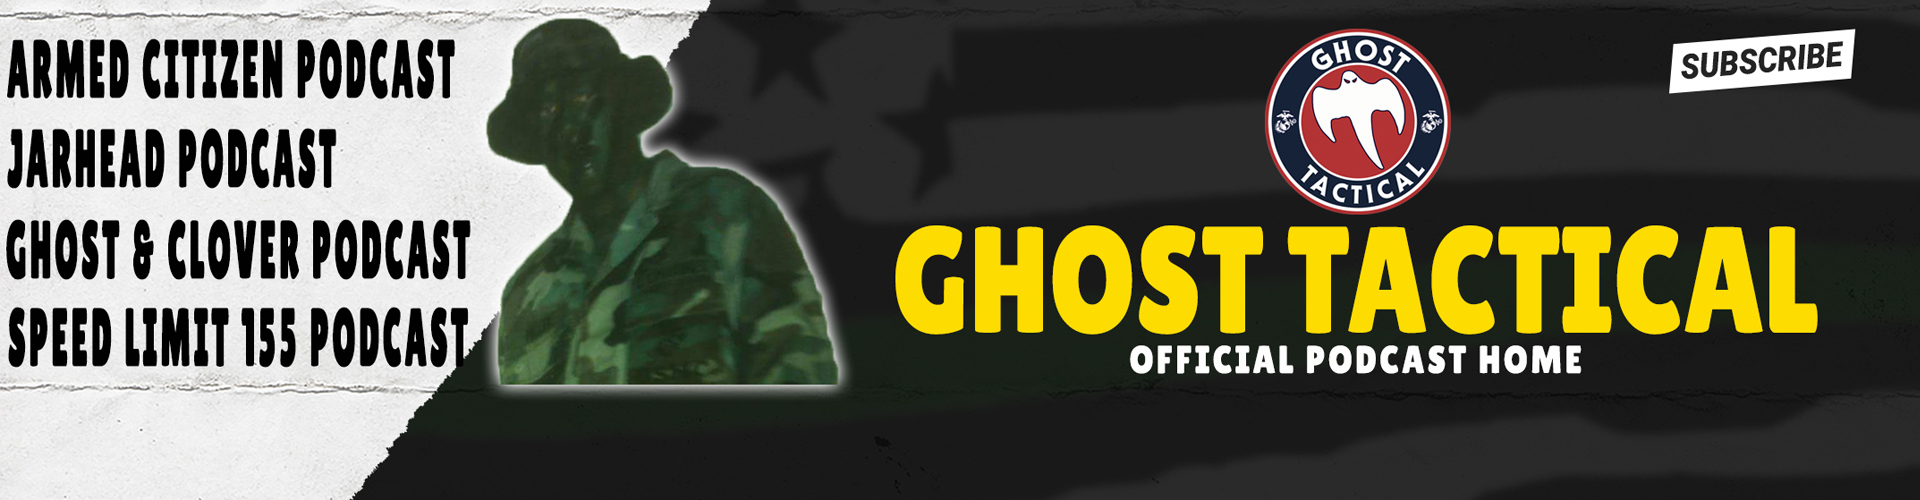 Ghost Tactical Podcasts